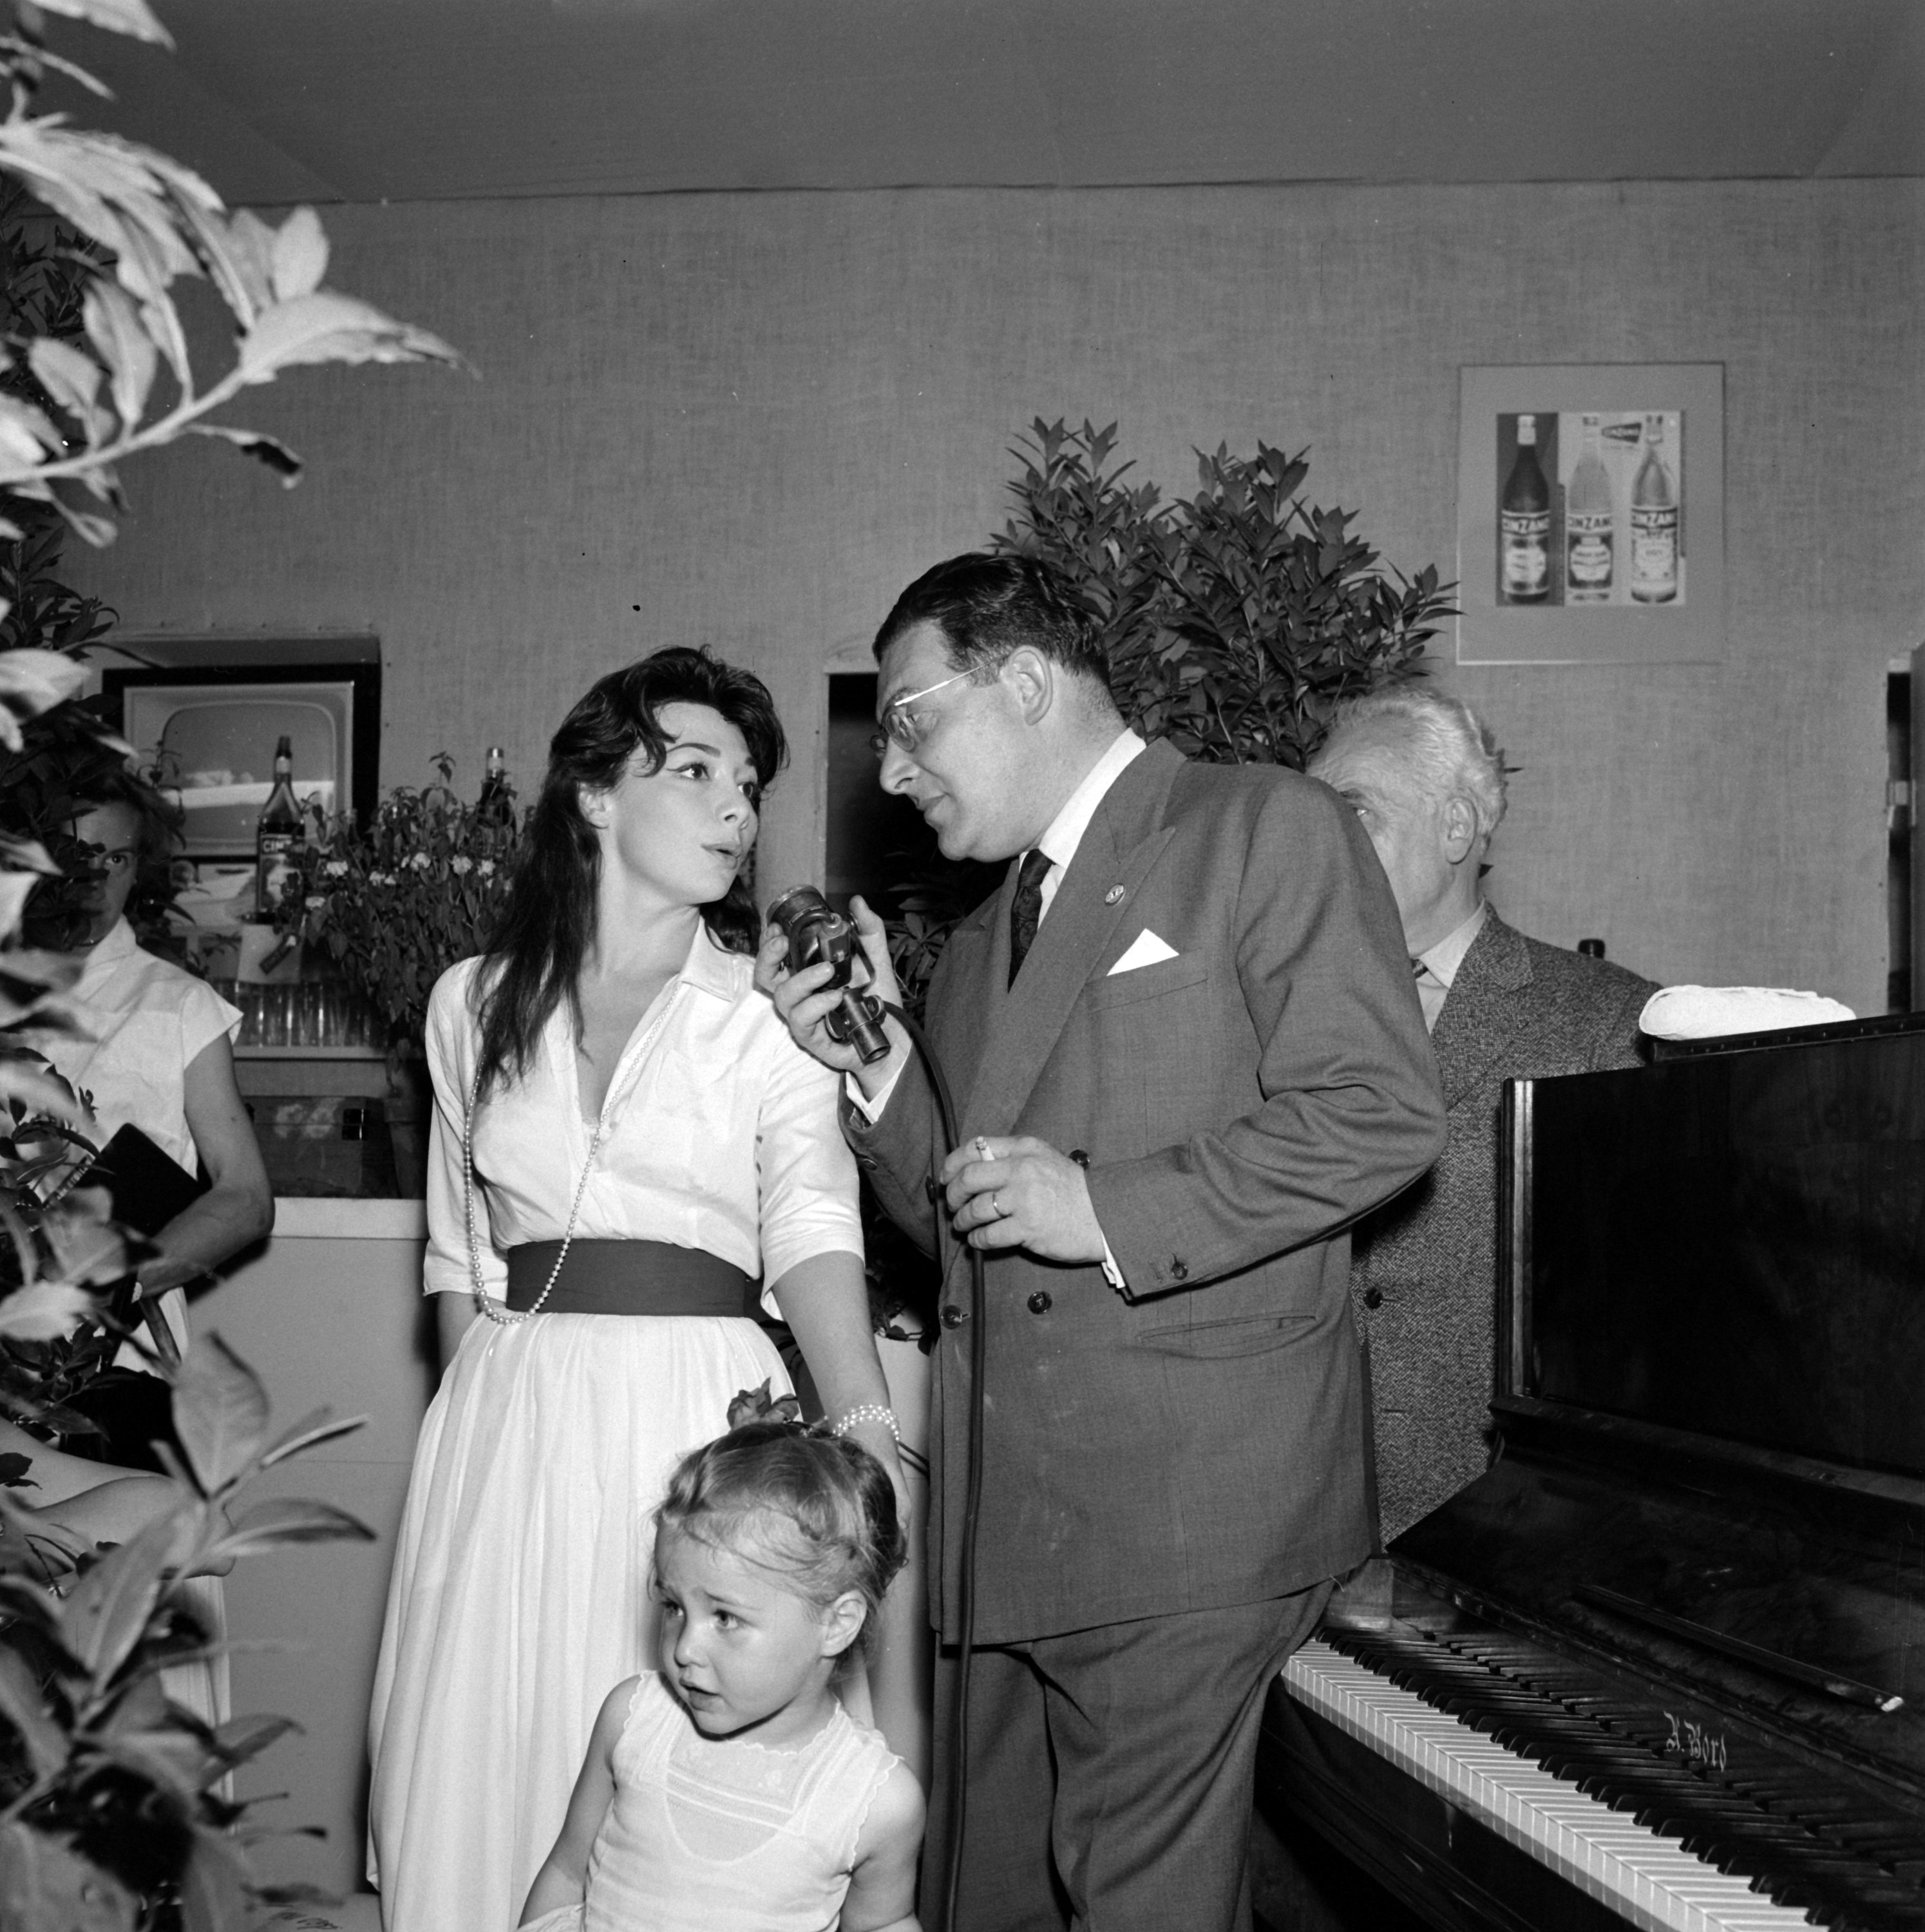 Juliette Greco accompanied by her girl answers Leon Zitrone's questions for the program "The Fair in Stars," 1959 | Photo: GettyImages